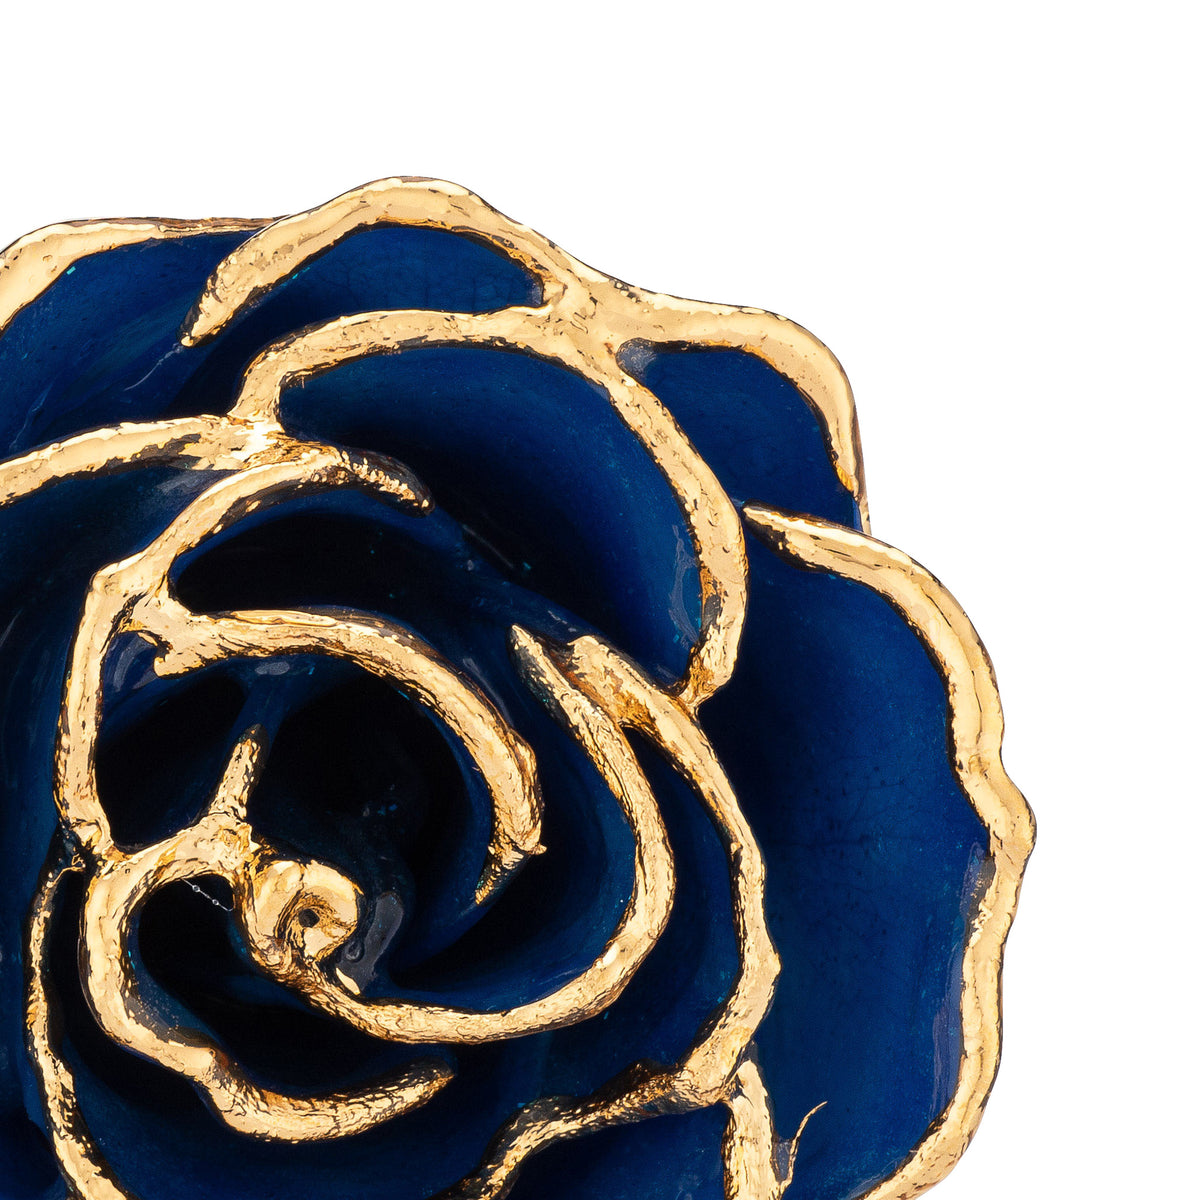 24K Gold Trimmed Forever Rose with Sapphire Blue Petals with Sapphire Suspended Sparkles. View of Stem, Leaves, and Rose Petals and Showing Detail of Gold Trim zoomed in view from top